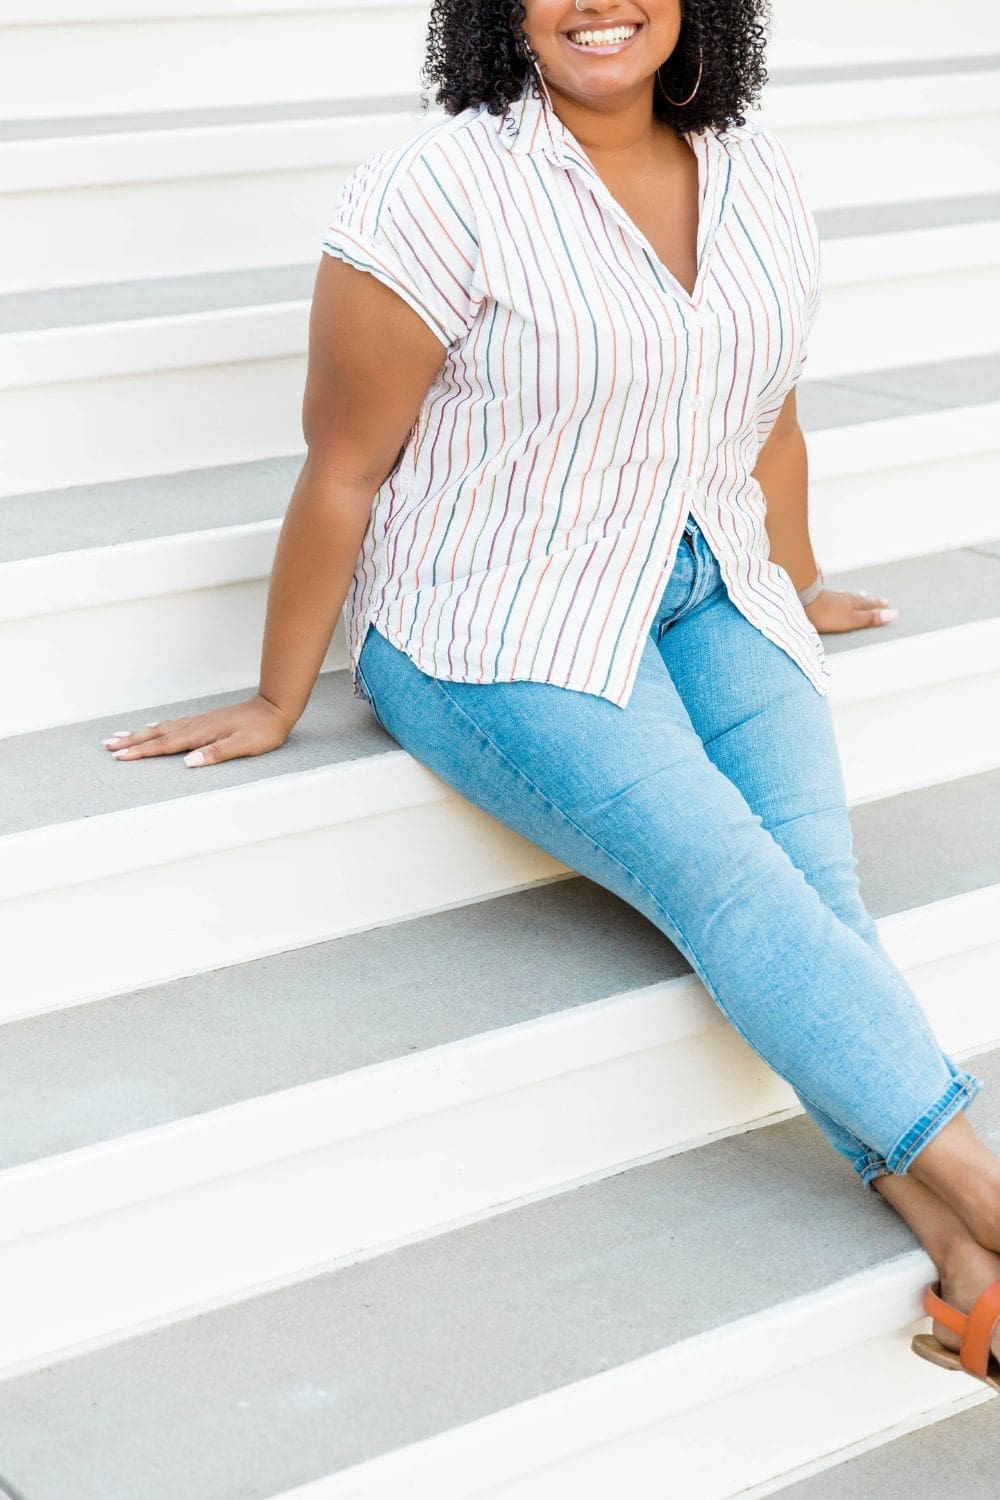 An image of an apple shaped black woman sitting on steps wearing a striped top and jeans illustrating the best jeans for an apple shape